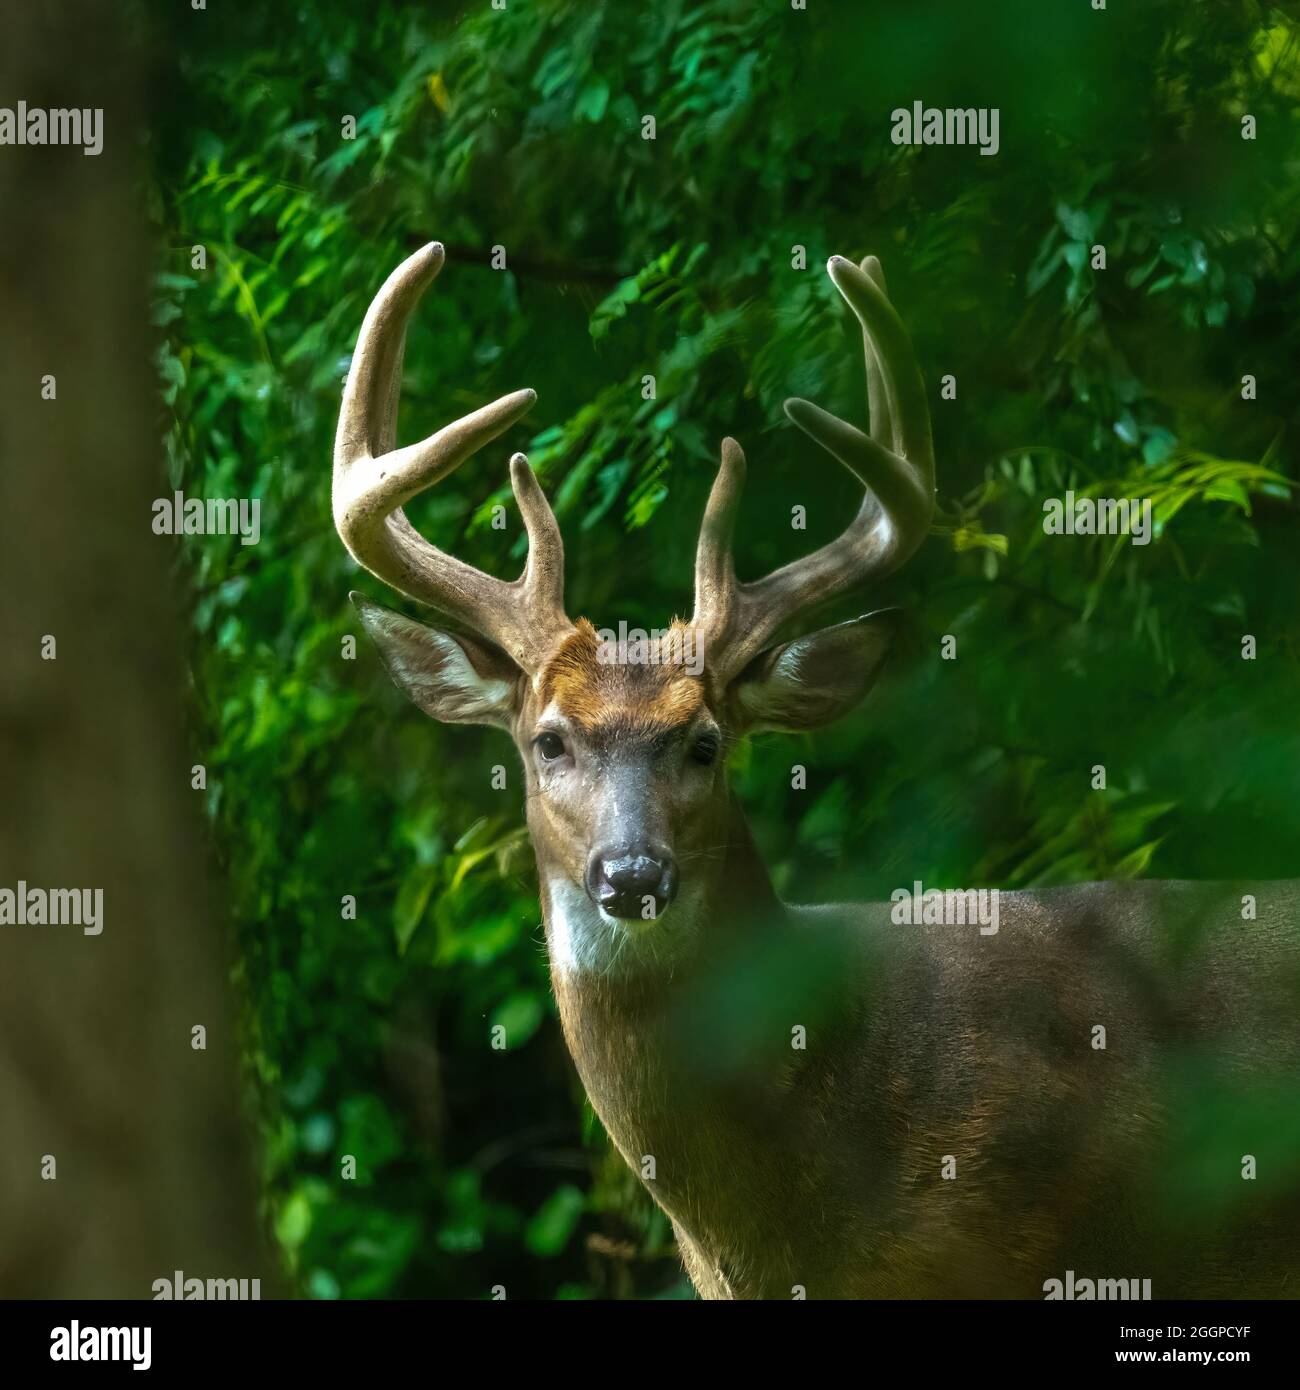 A Male White Tailed Deer (Odocoileus virginianus) Buck with large antlers peering through the forest  in Michigan, USA. Stock Photo